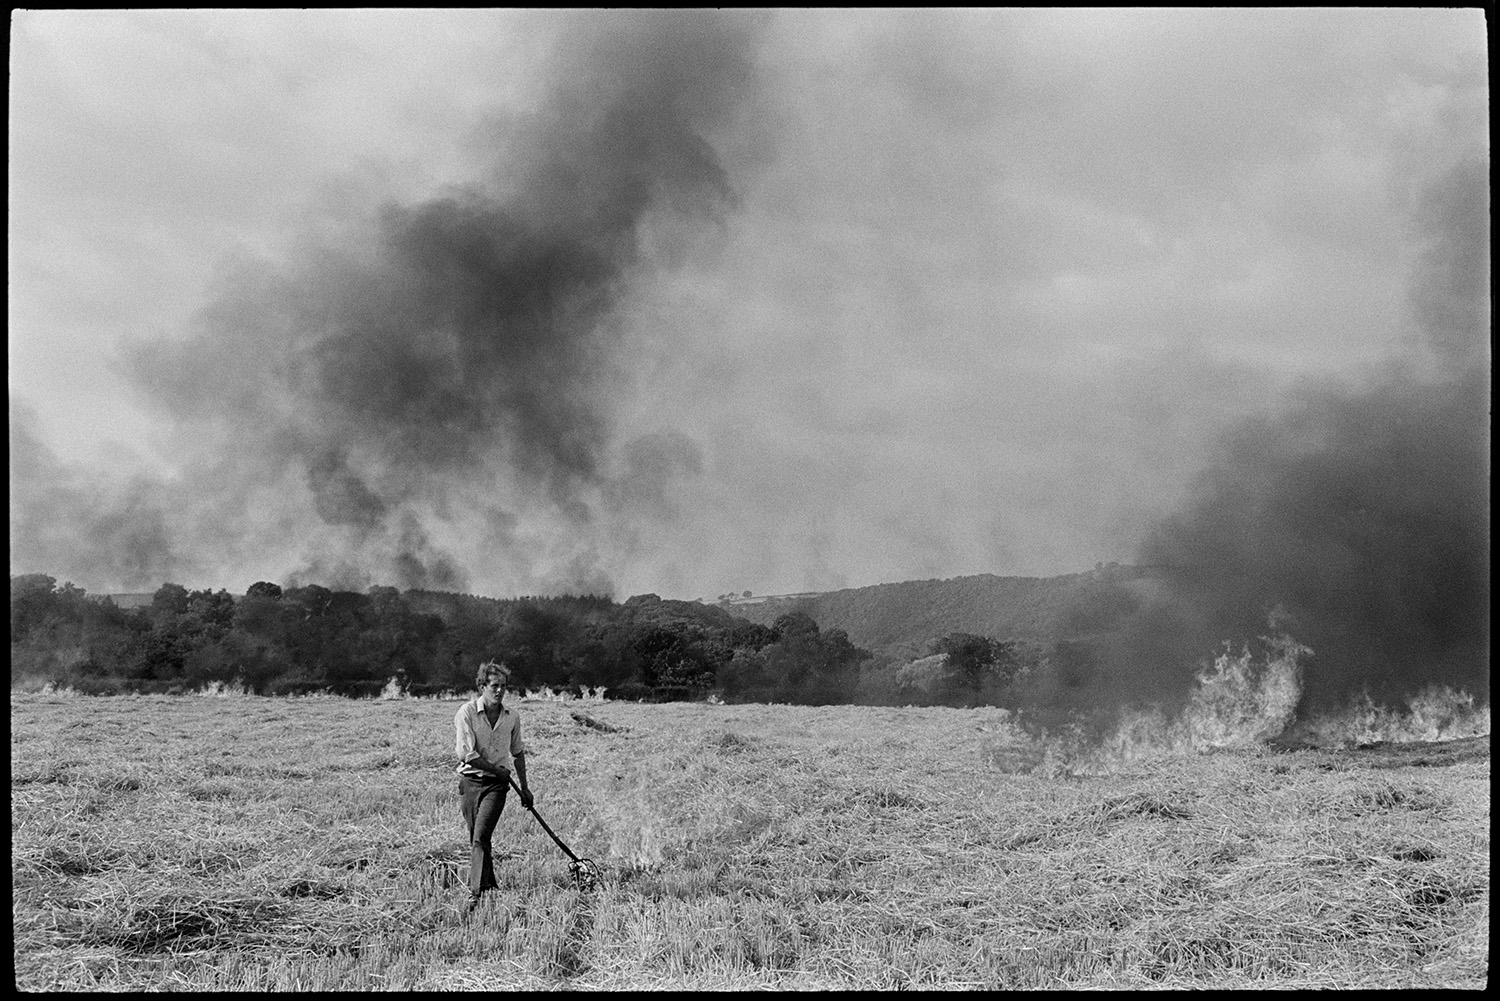 Farmer burning stubble. 
[A man burning crop stubble in a field at Greatwood, Merton. He is using a fork to light the stubble. Black smoke is rising from the stubble already alight and woodland can be seen in the background.]